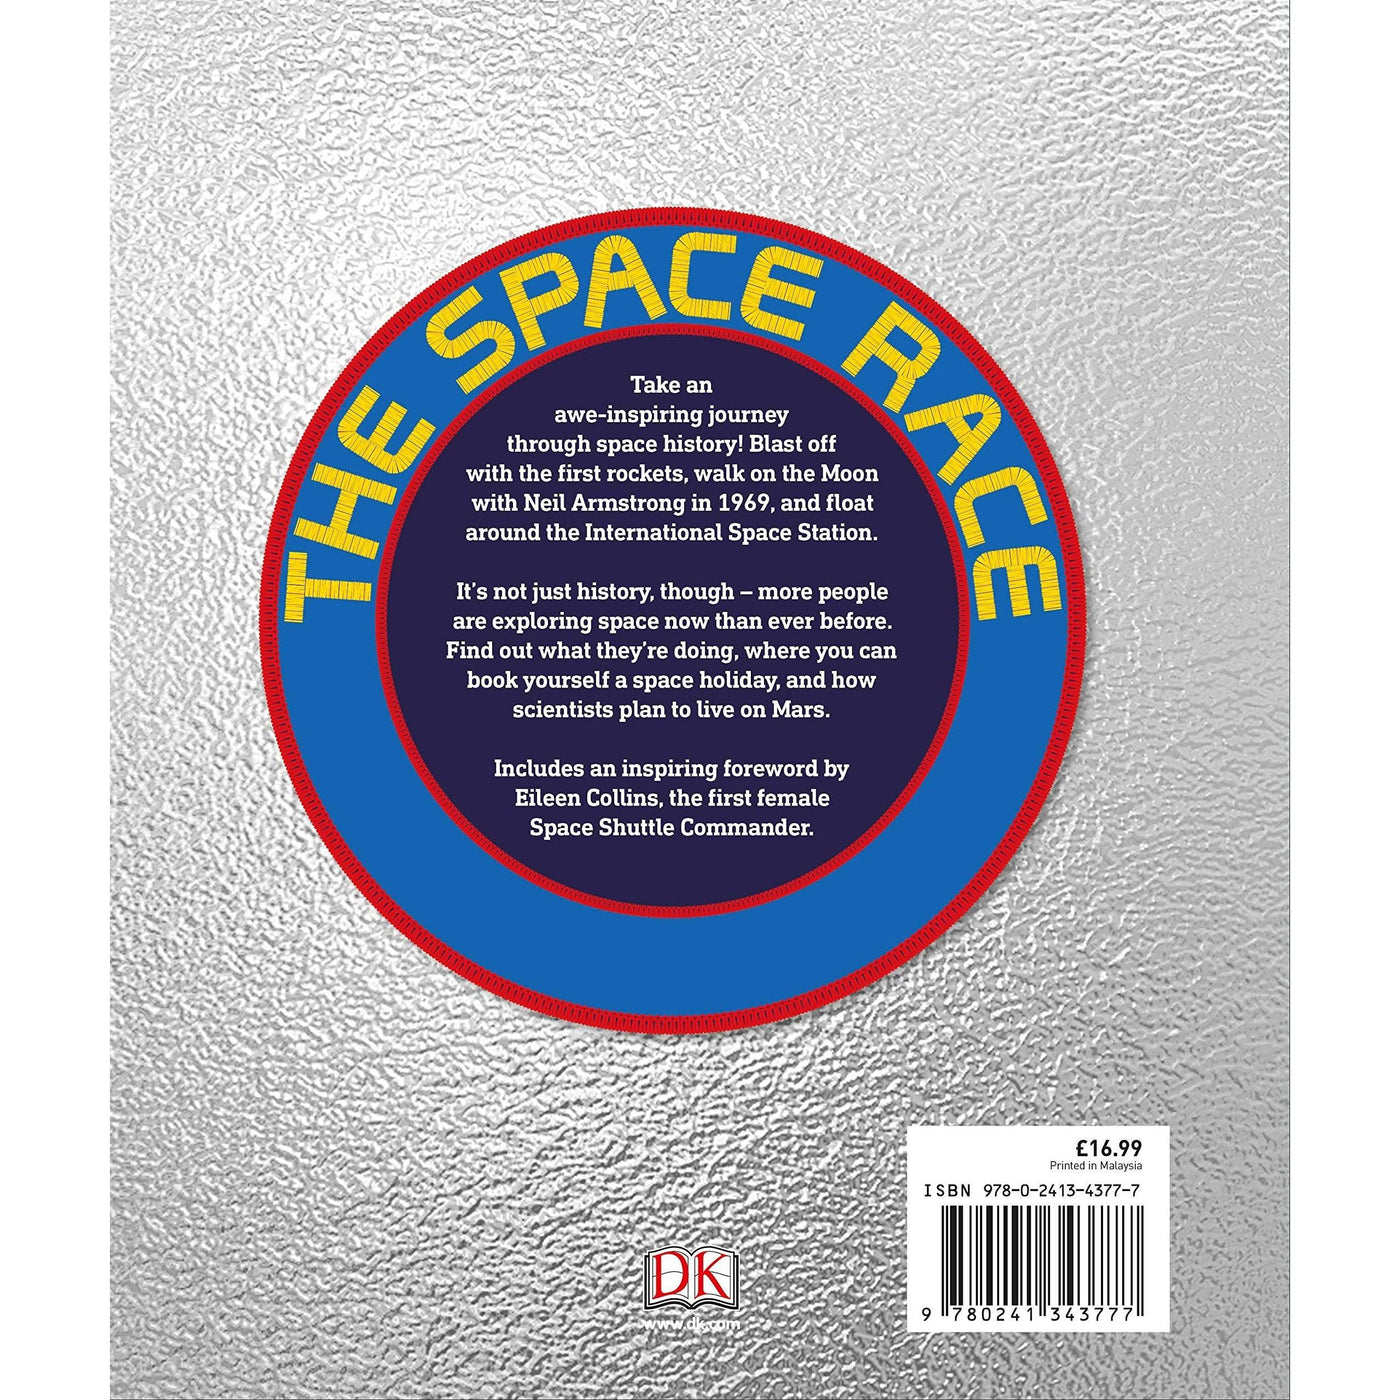 The Space Race: The Journey to the Moon and Beyond